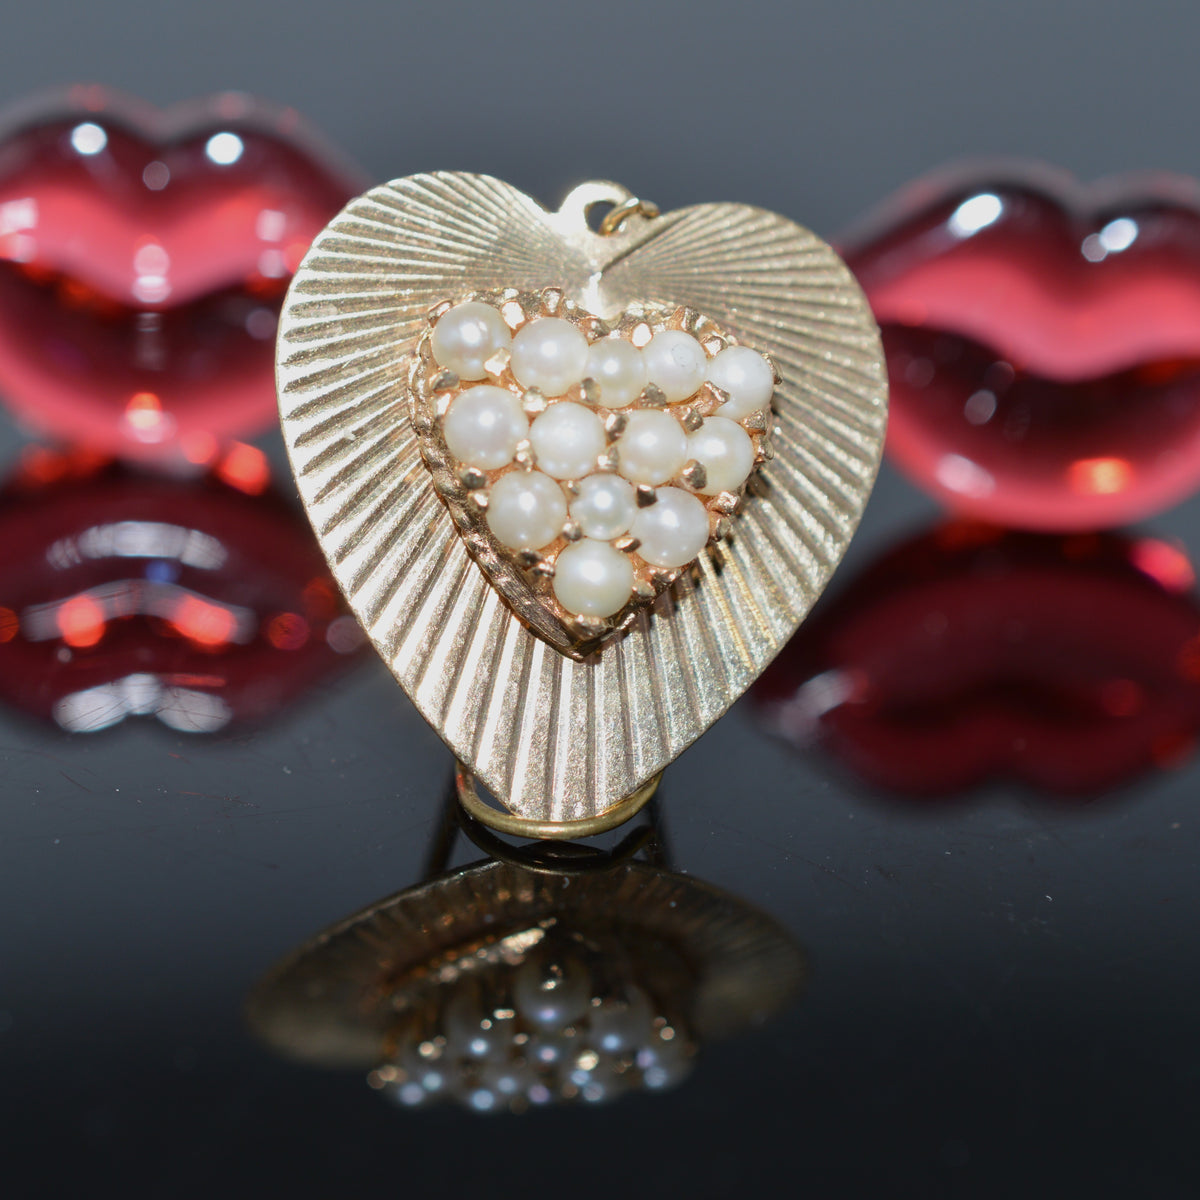 14K Yellow Gold Large Heart Shape Charm With Pearl Cluster